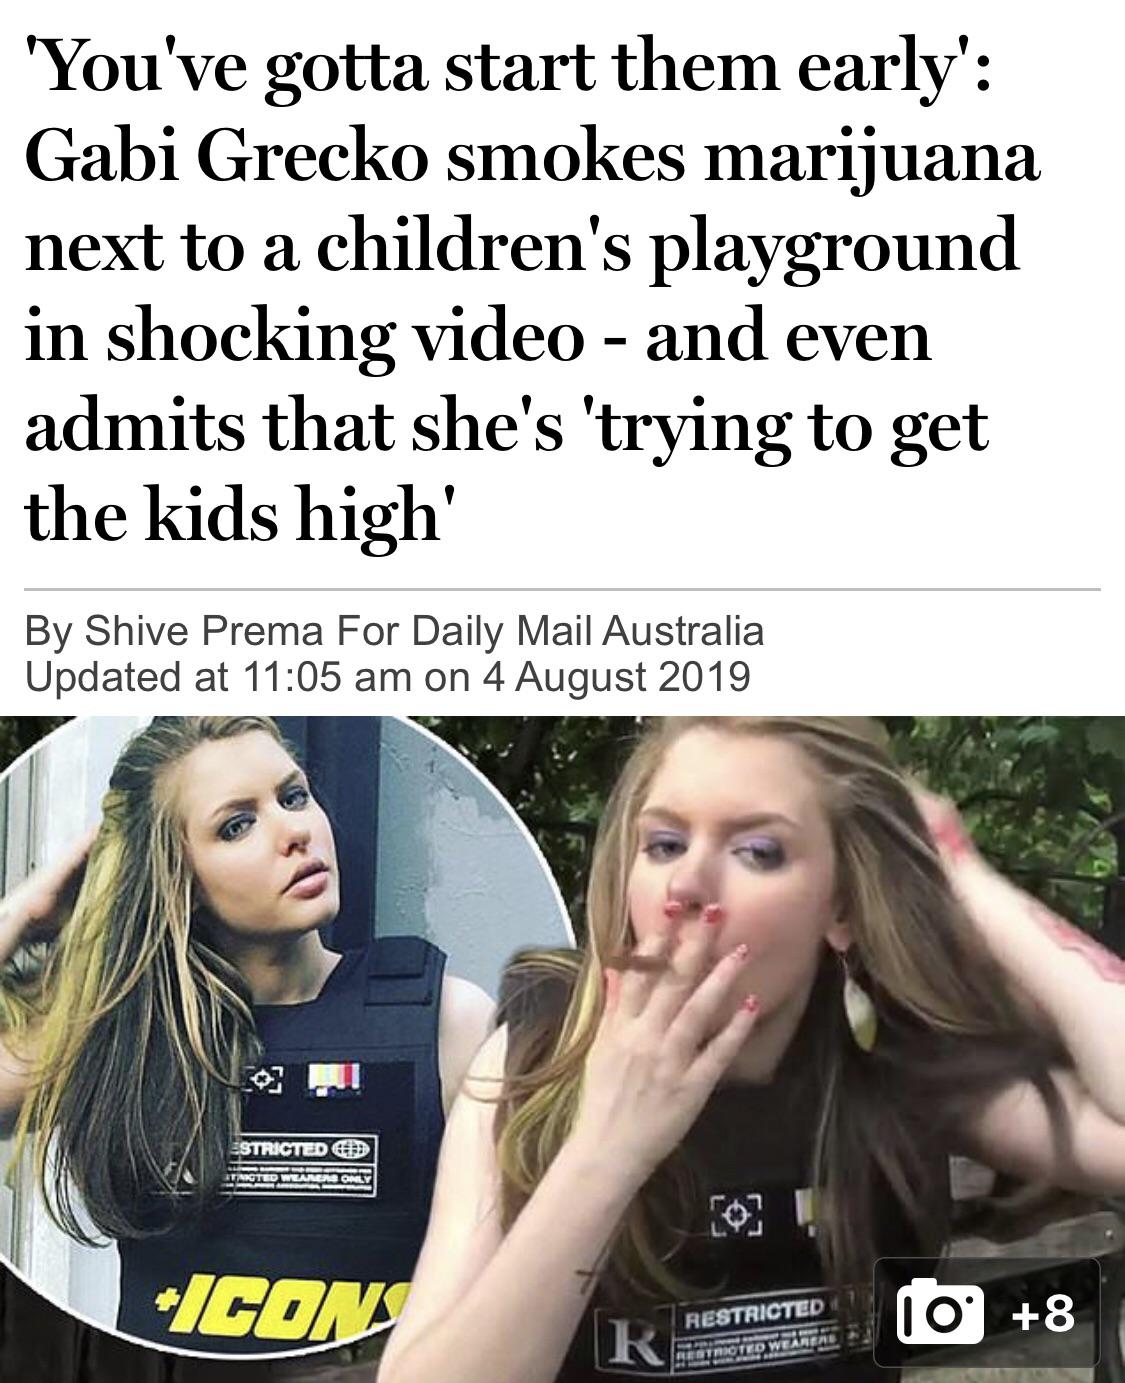 blond - You've gotta start them early Gabi Grecko smokes marijuana next to a children's playground in shocking video and even admits that she's 'trying to get the kids high' By Shive Prema For Daily Mail Australia Updated at on Estricted We Only Icons Res